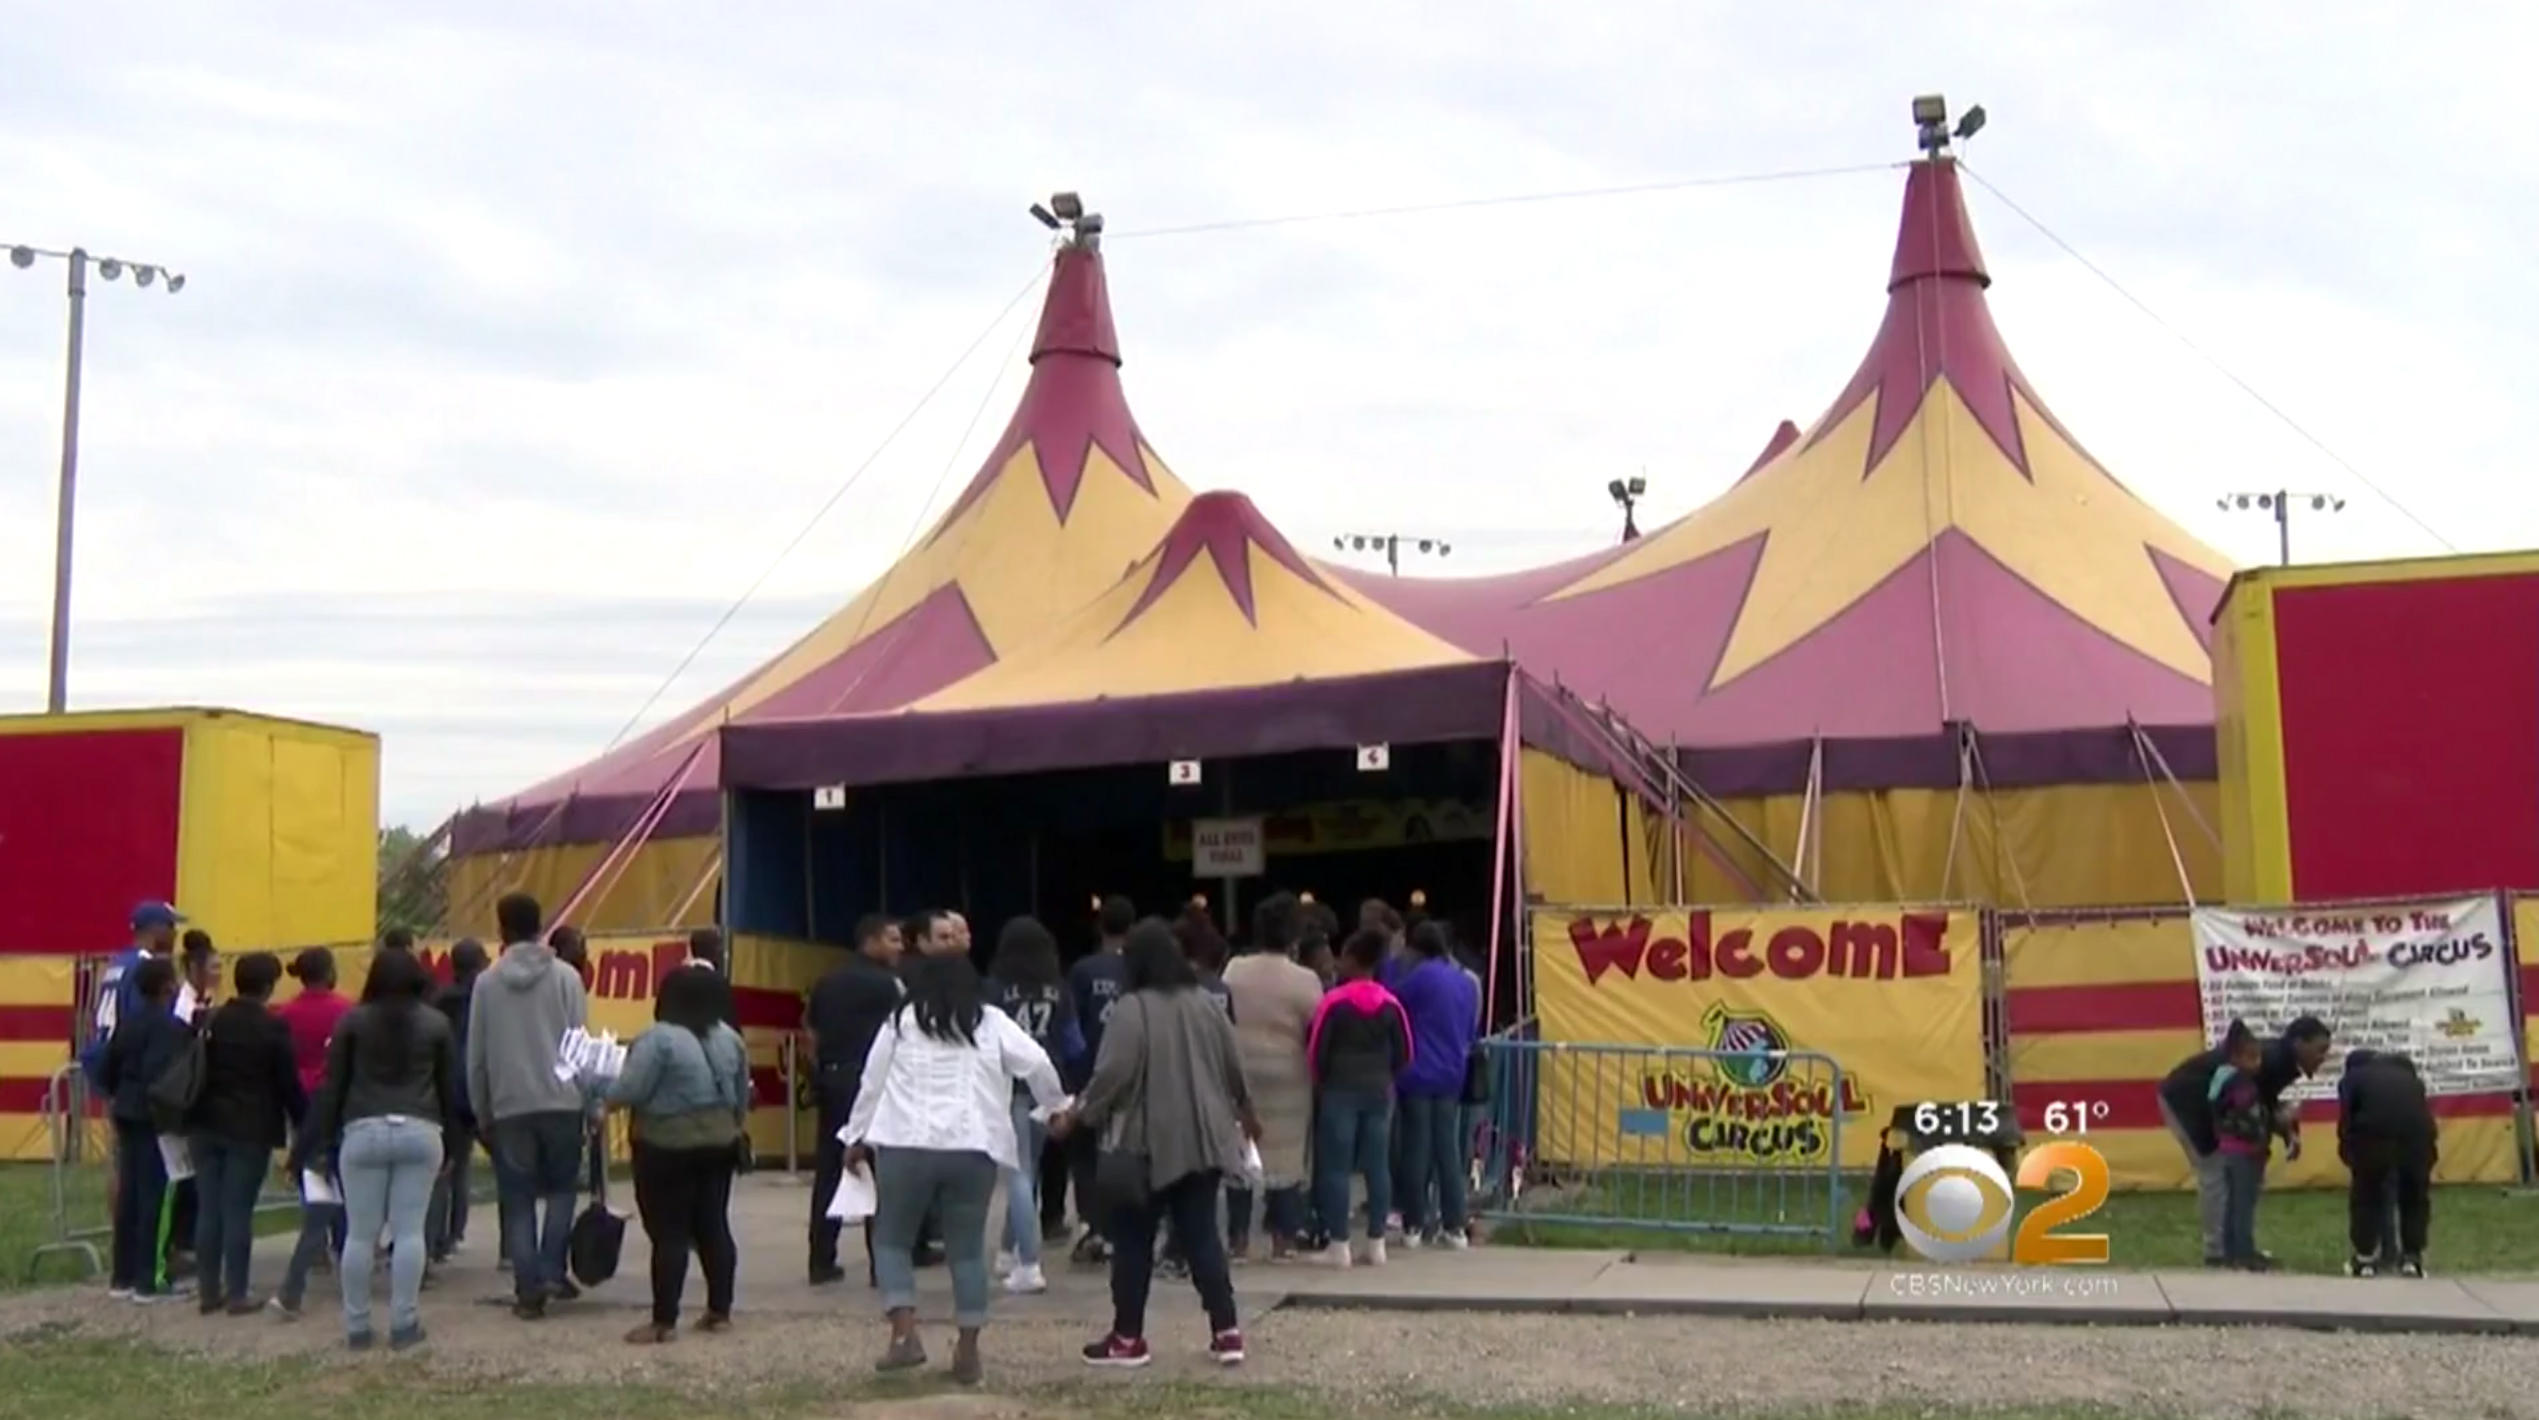 Circus performer falls nearly 40 feet during "Wheel of Death" stunt